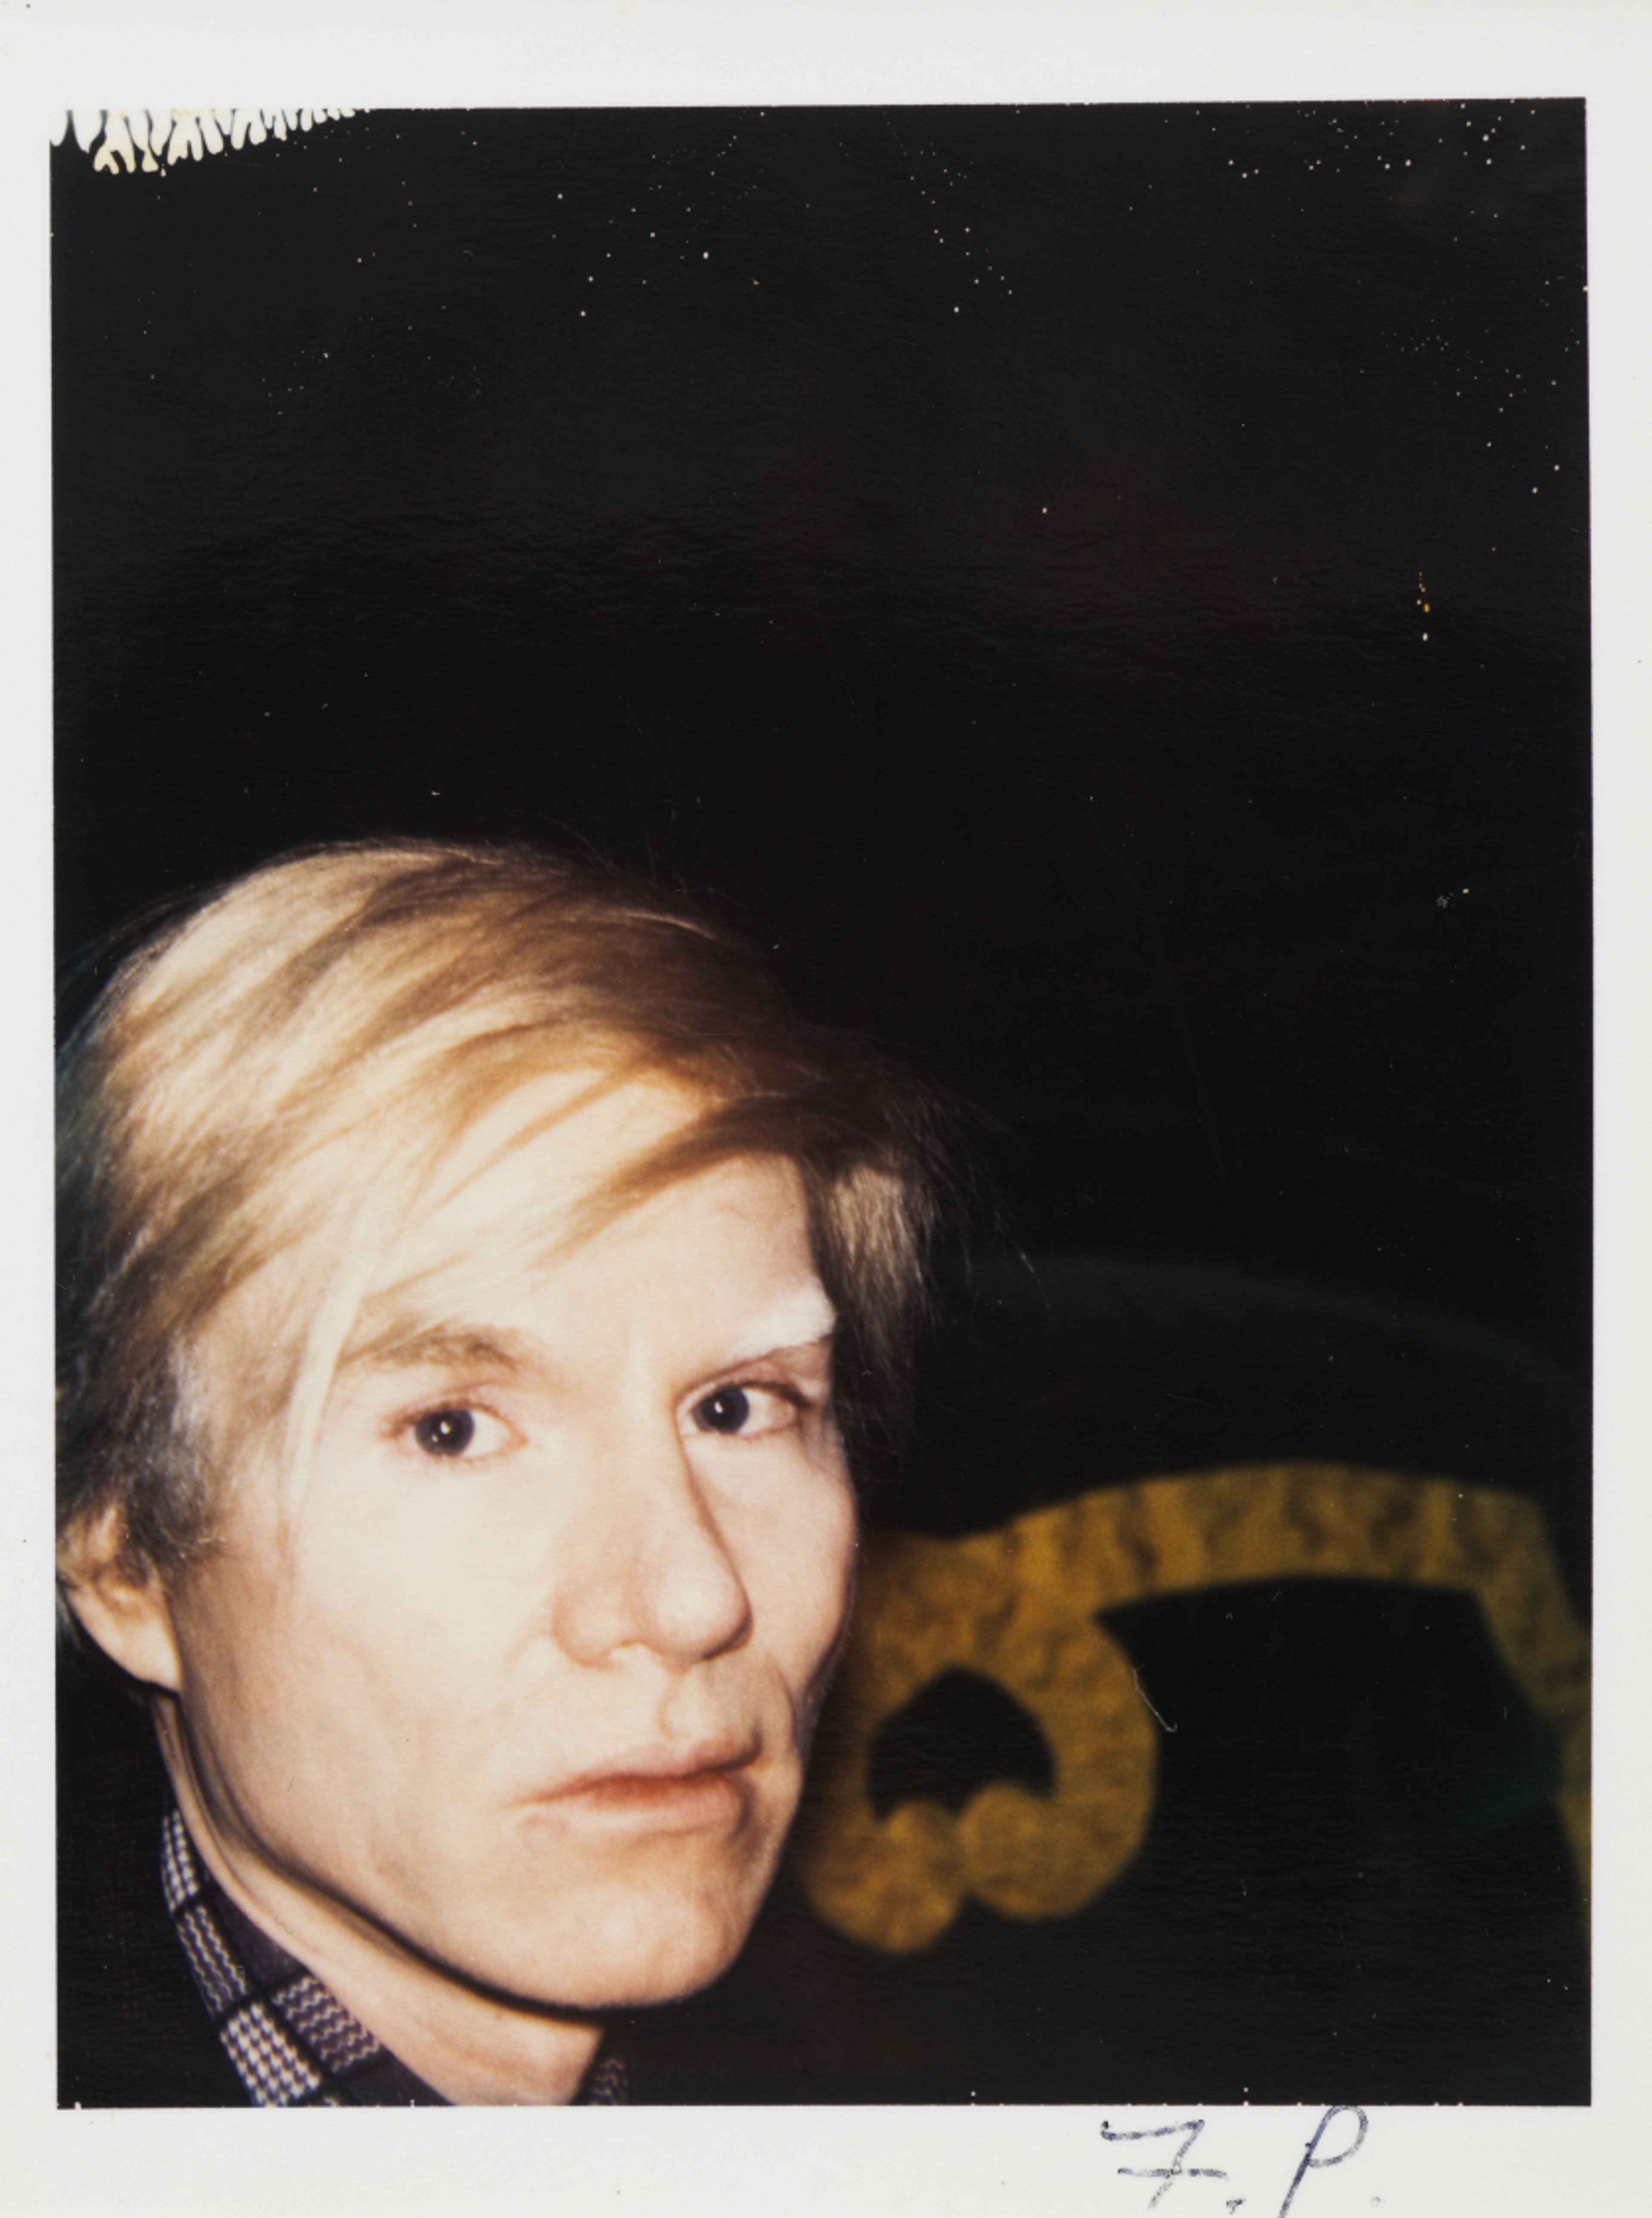 Portrait of Andy Warhol wearing a blonde wig, looking into the camera.